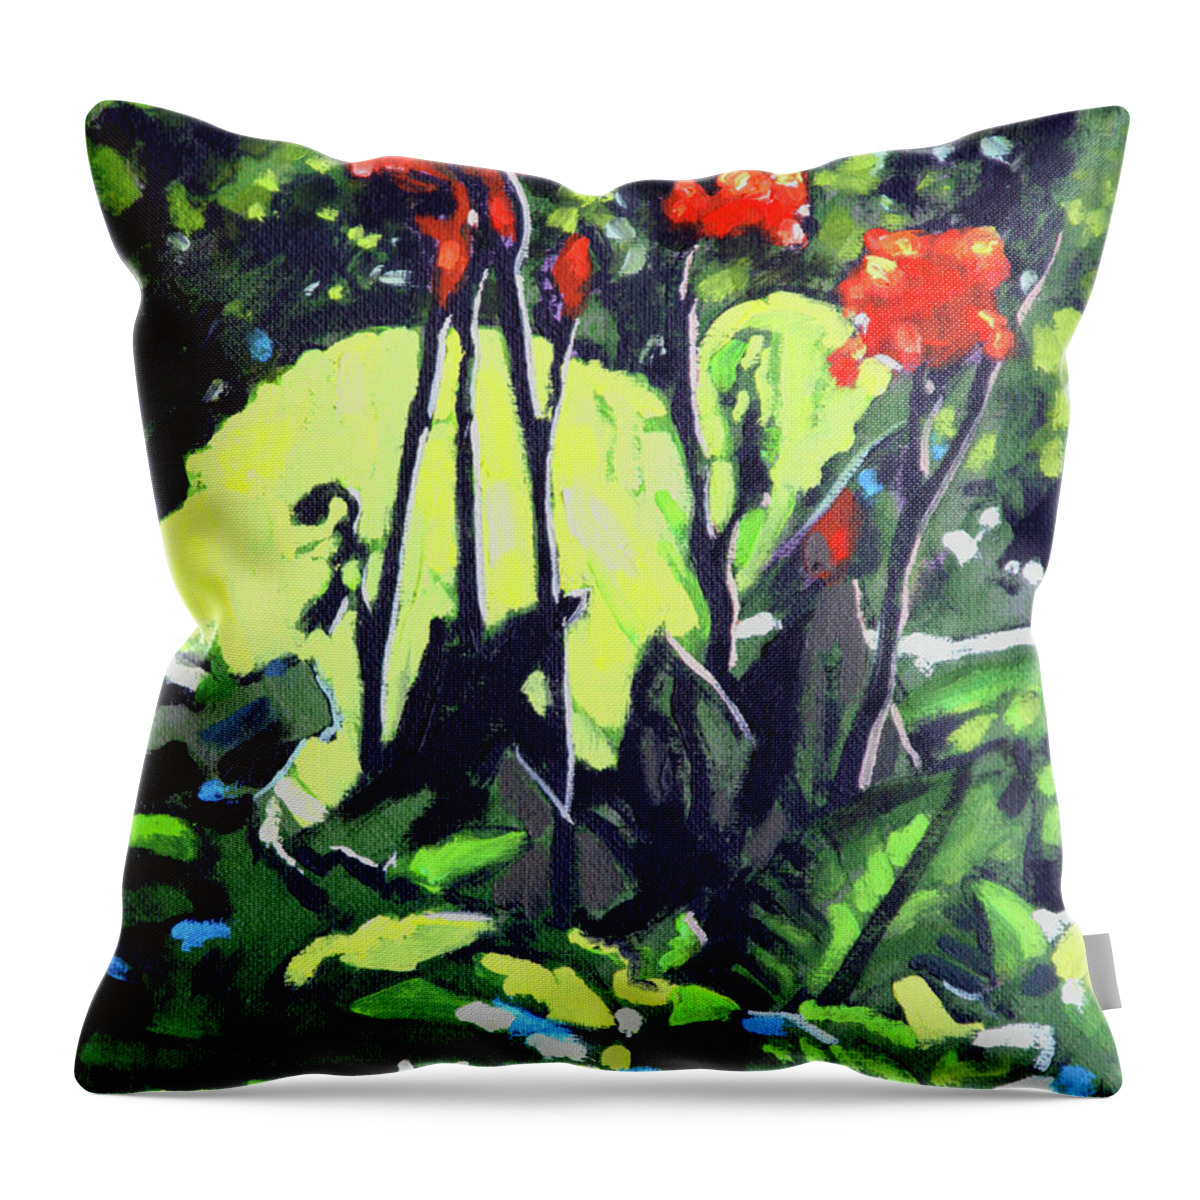 Flowers Throw Pillow featuring the painting Summer Sunlight by John Lautermilch